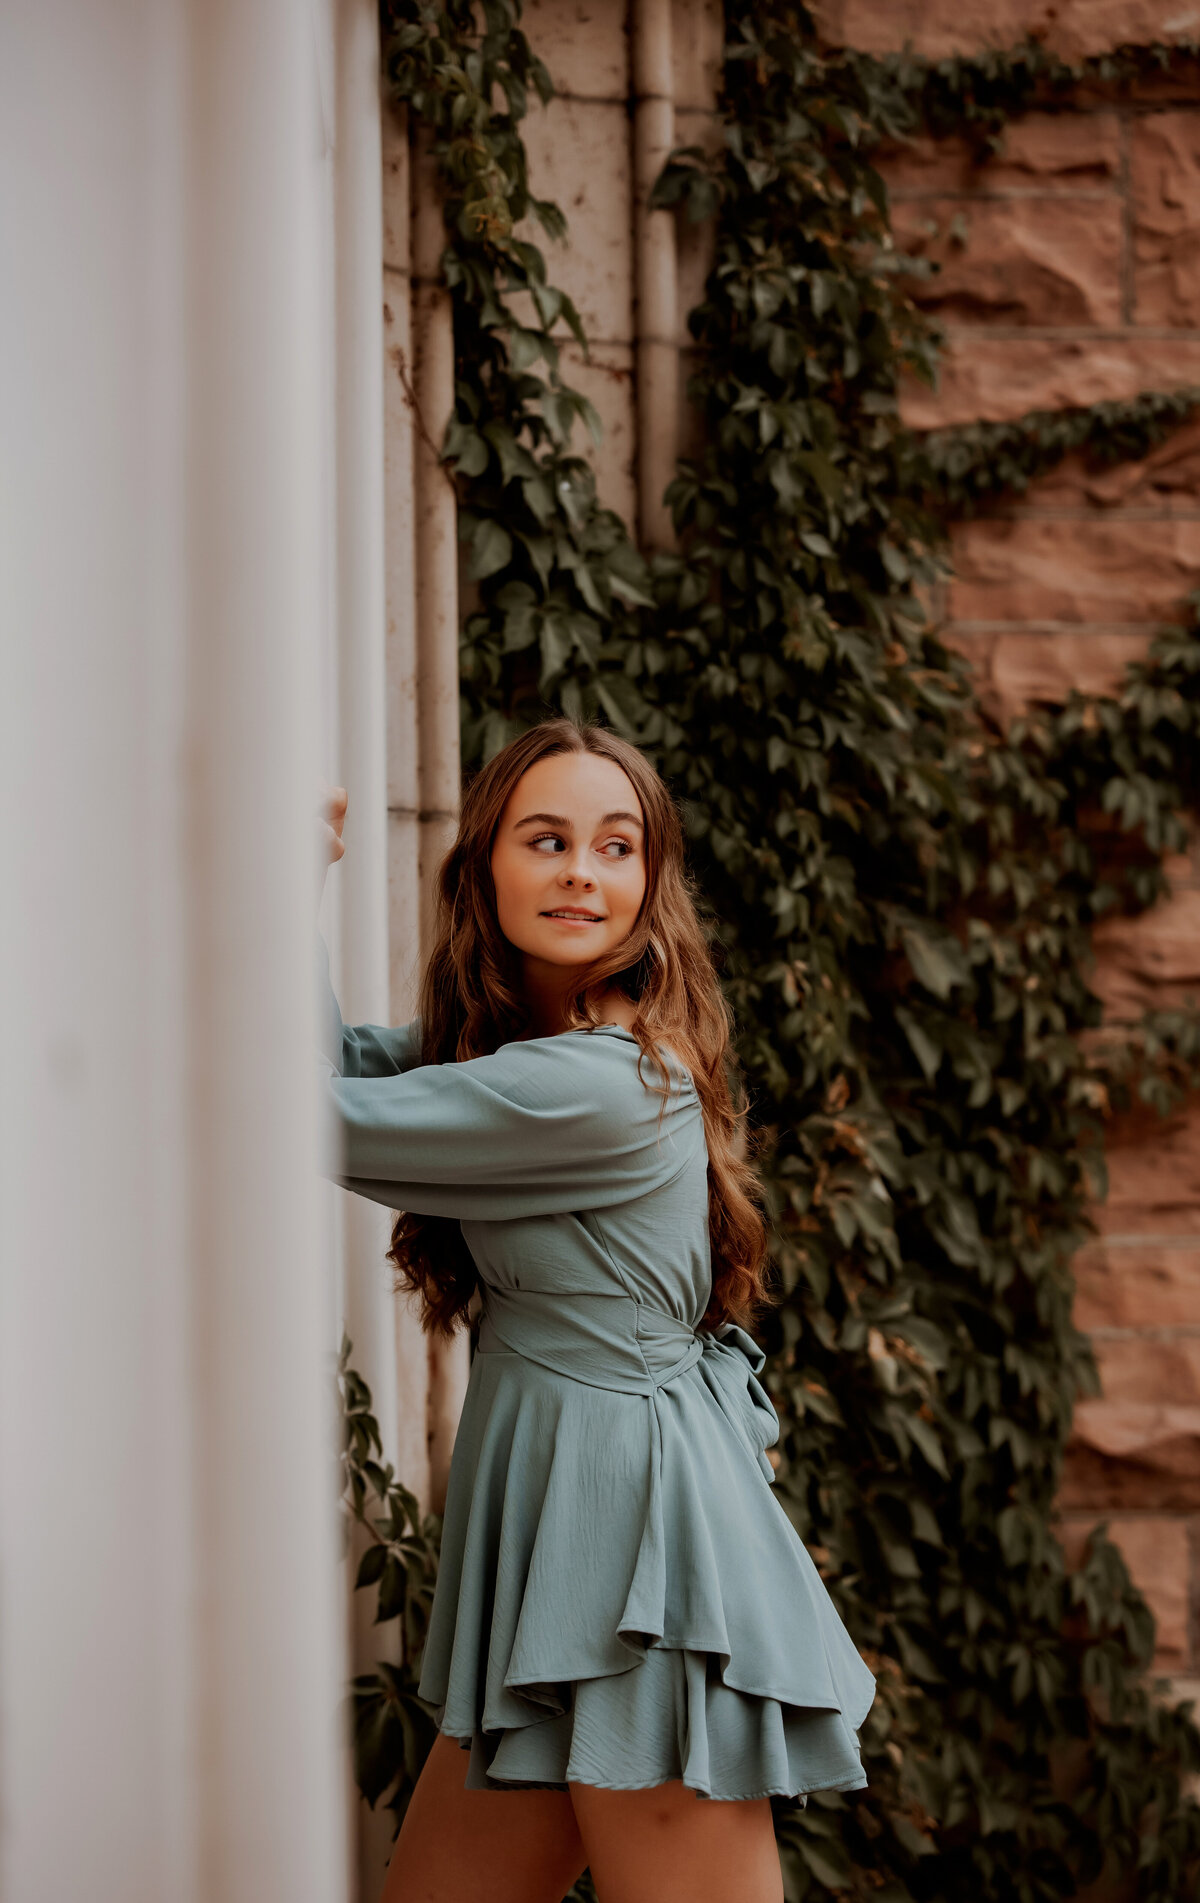 senior girl leans against white wall with green vines in boulder colorado